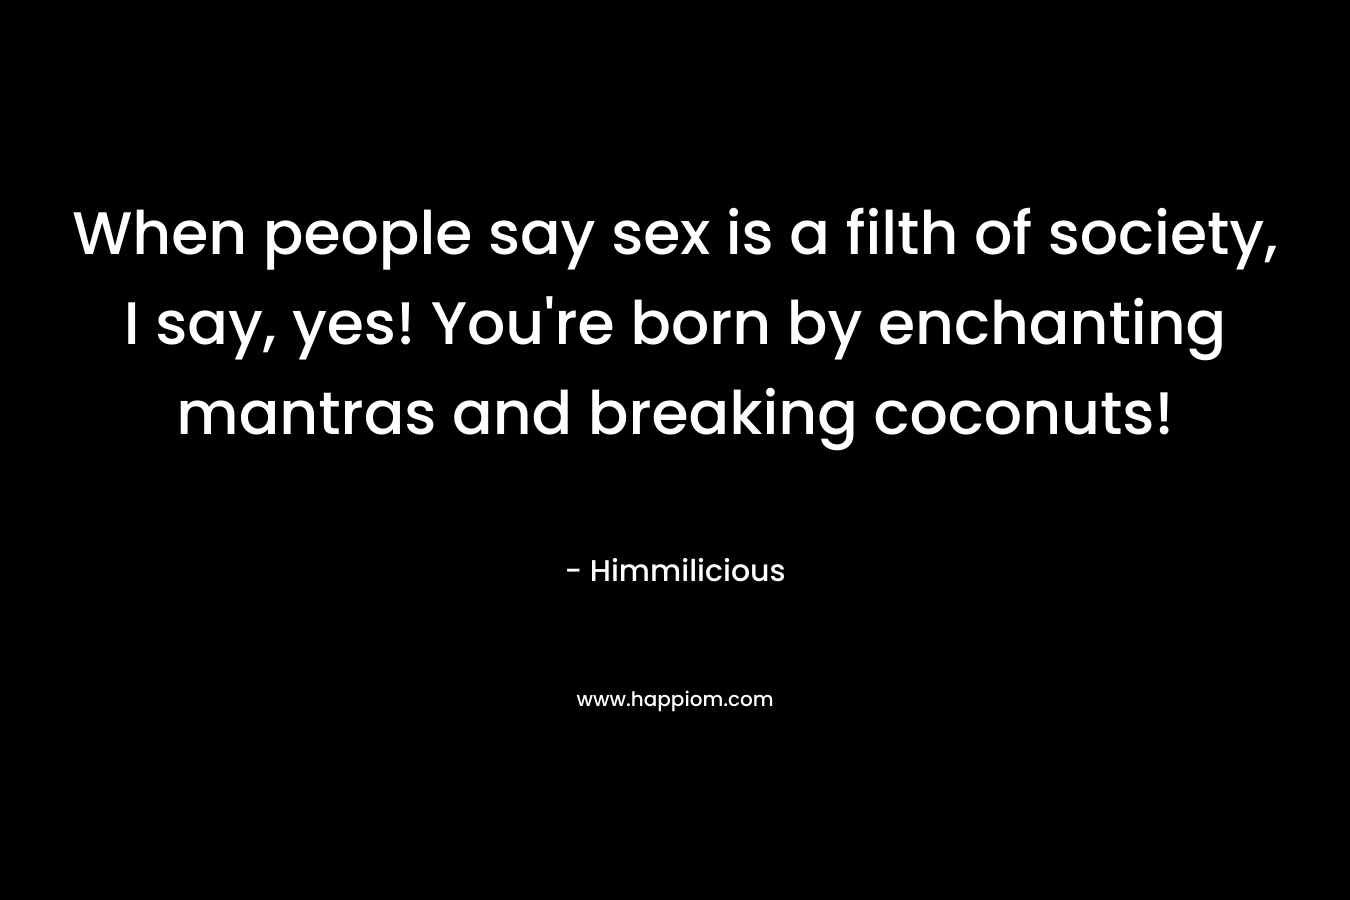 When people say sex is a filth of society, I say, yes! You're born by enchanting mantras and breaking coconuts!